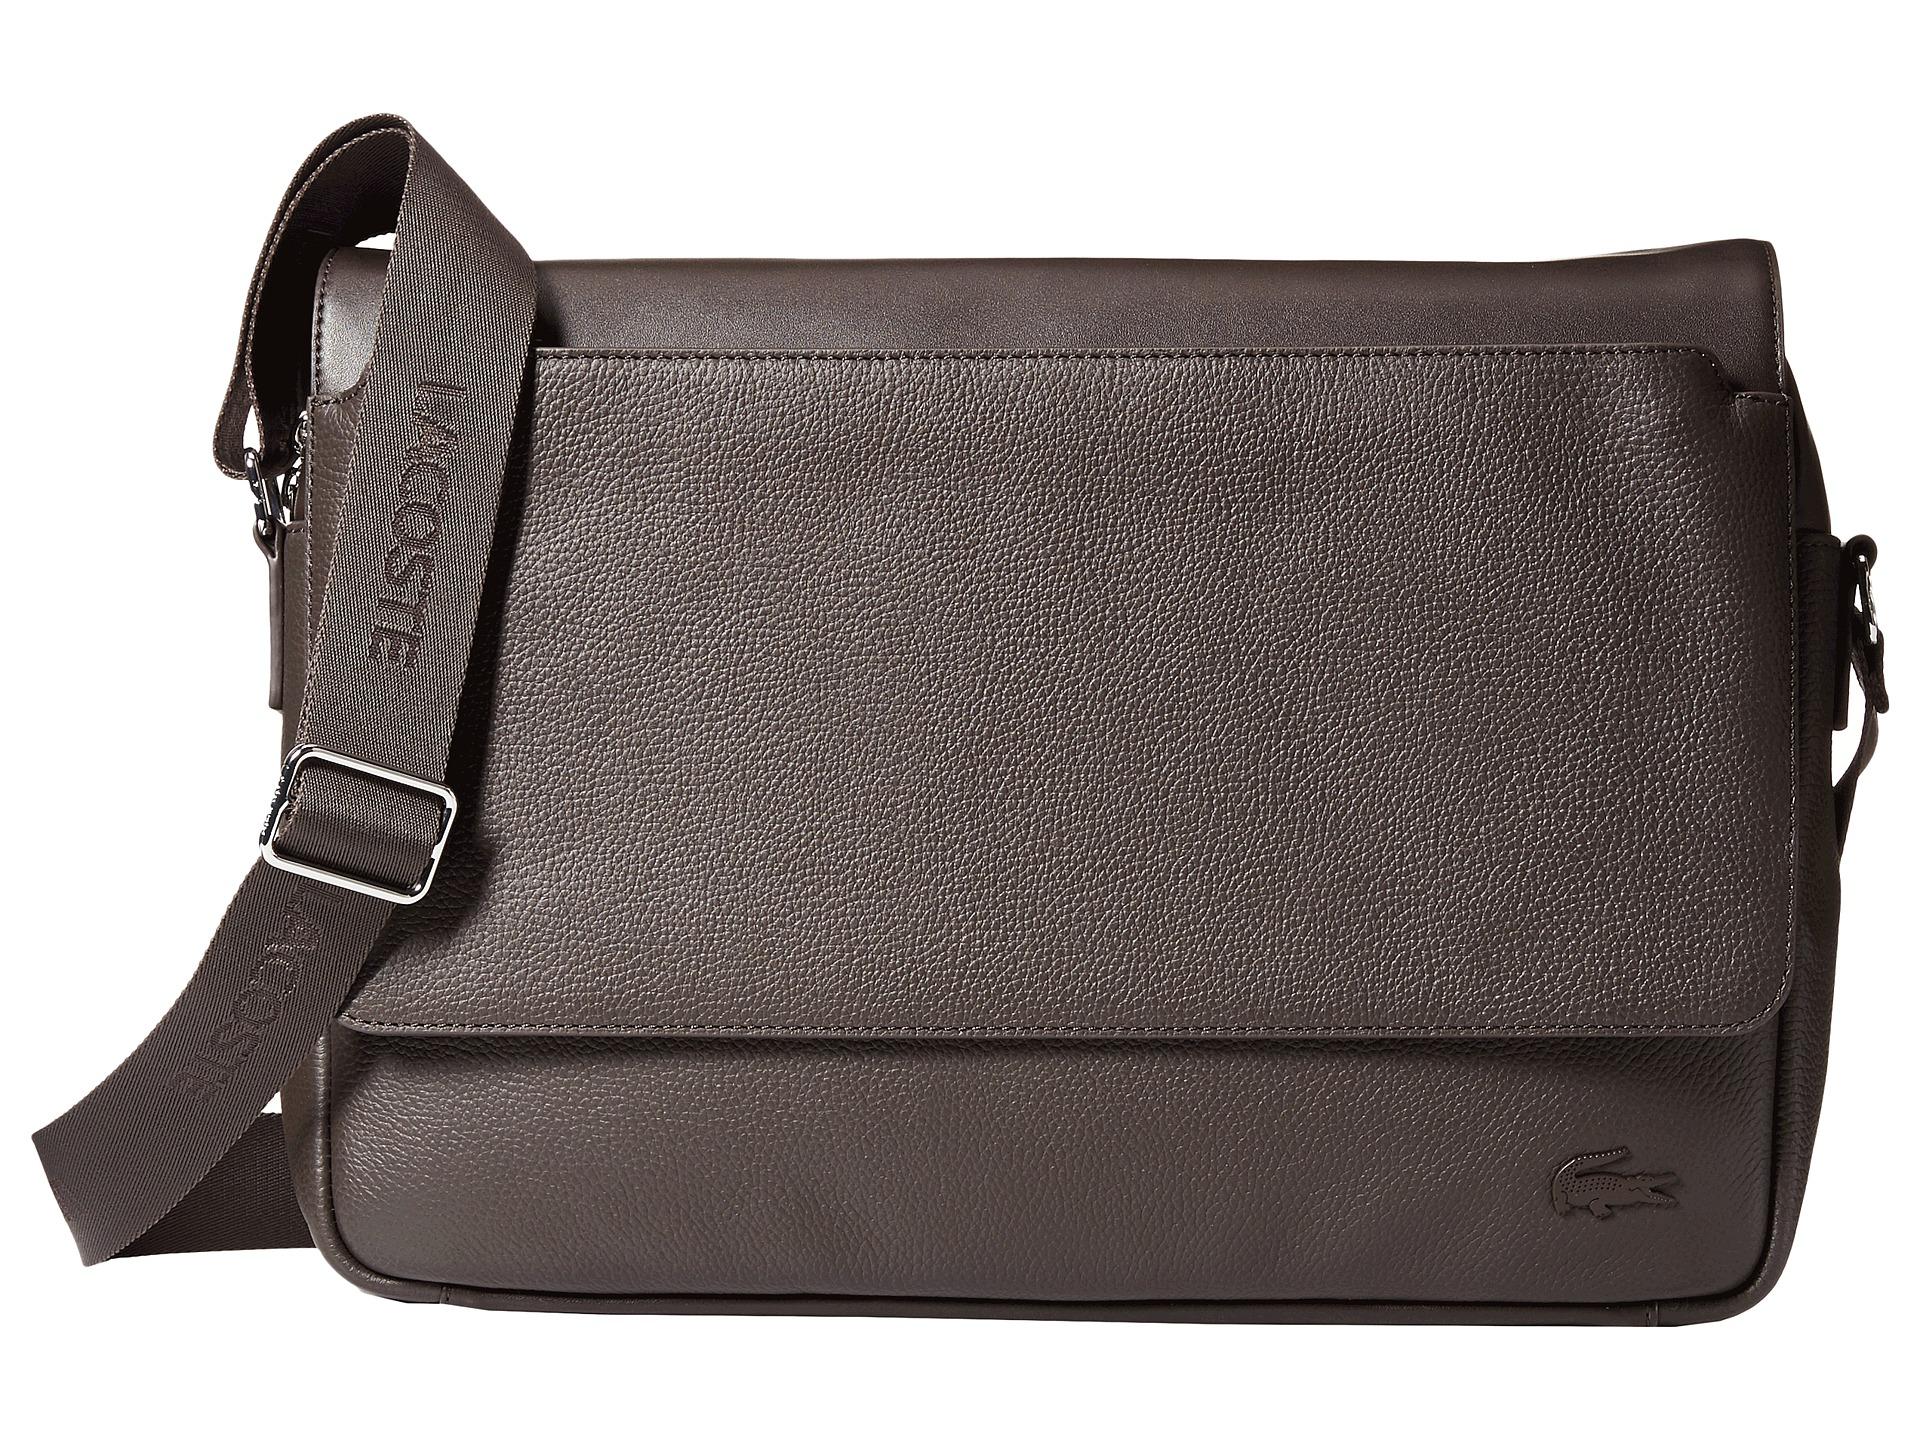 Lacoste Rafael Leather Messenger Bag in Brown for Men - Lyst